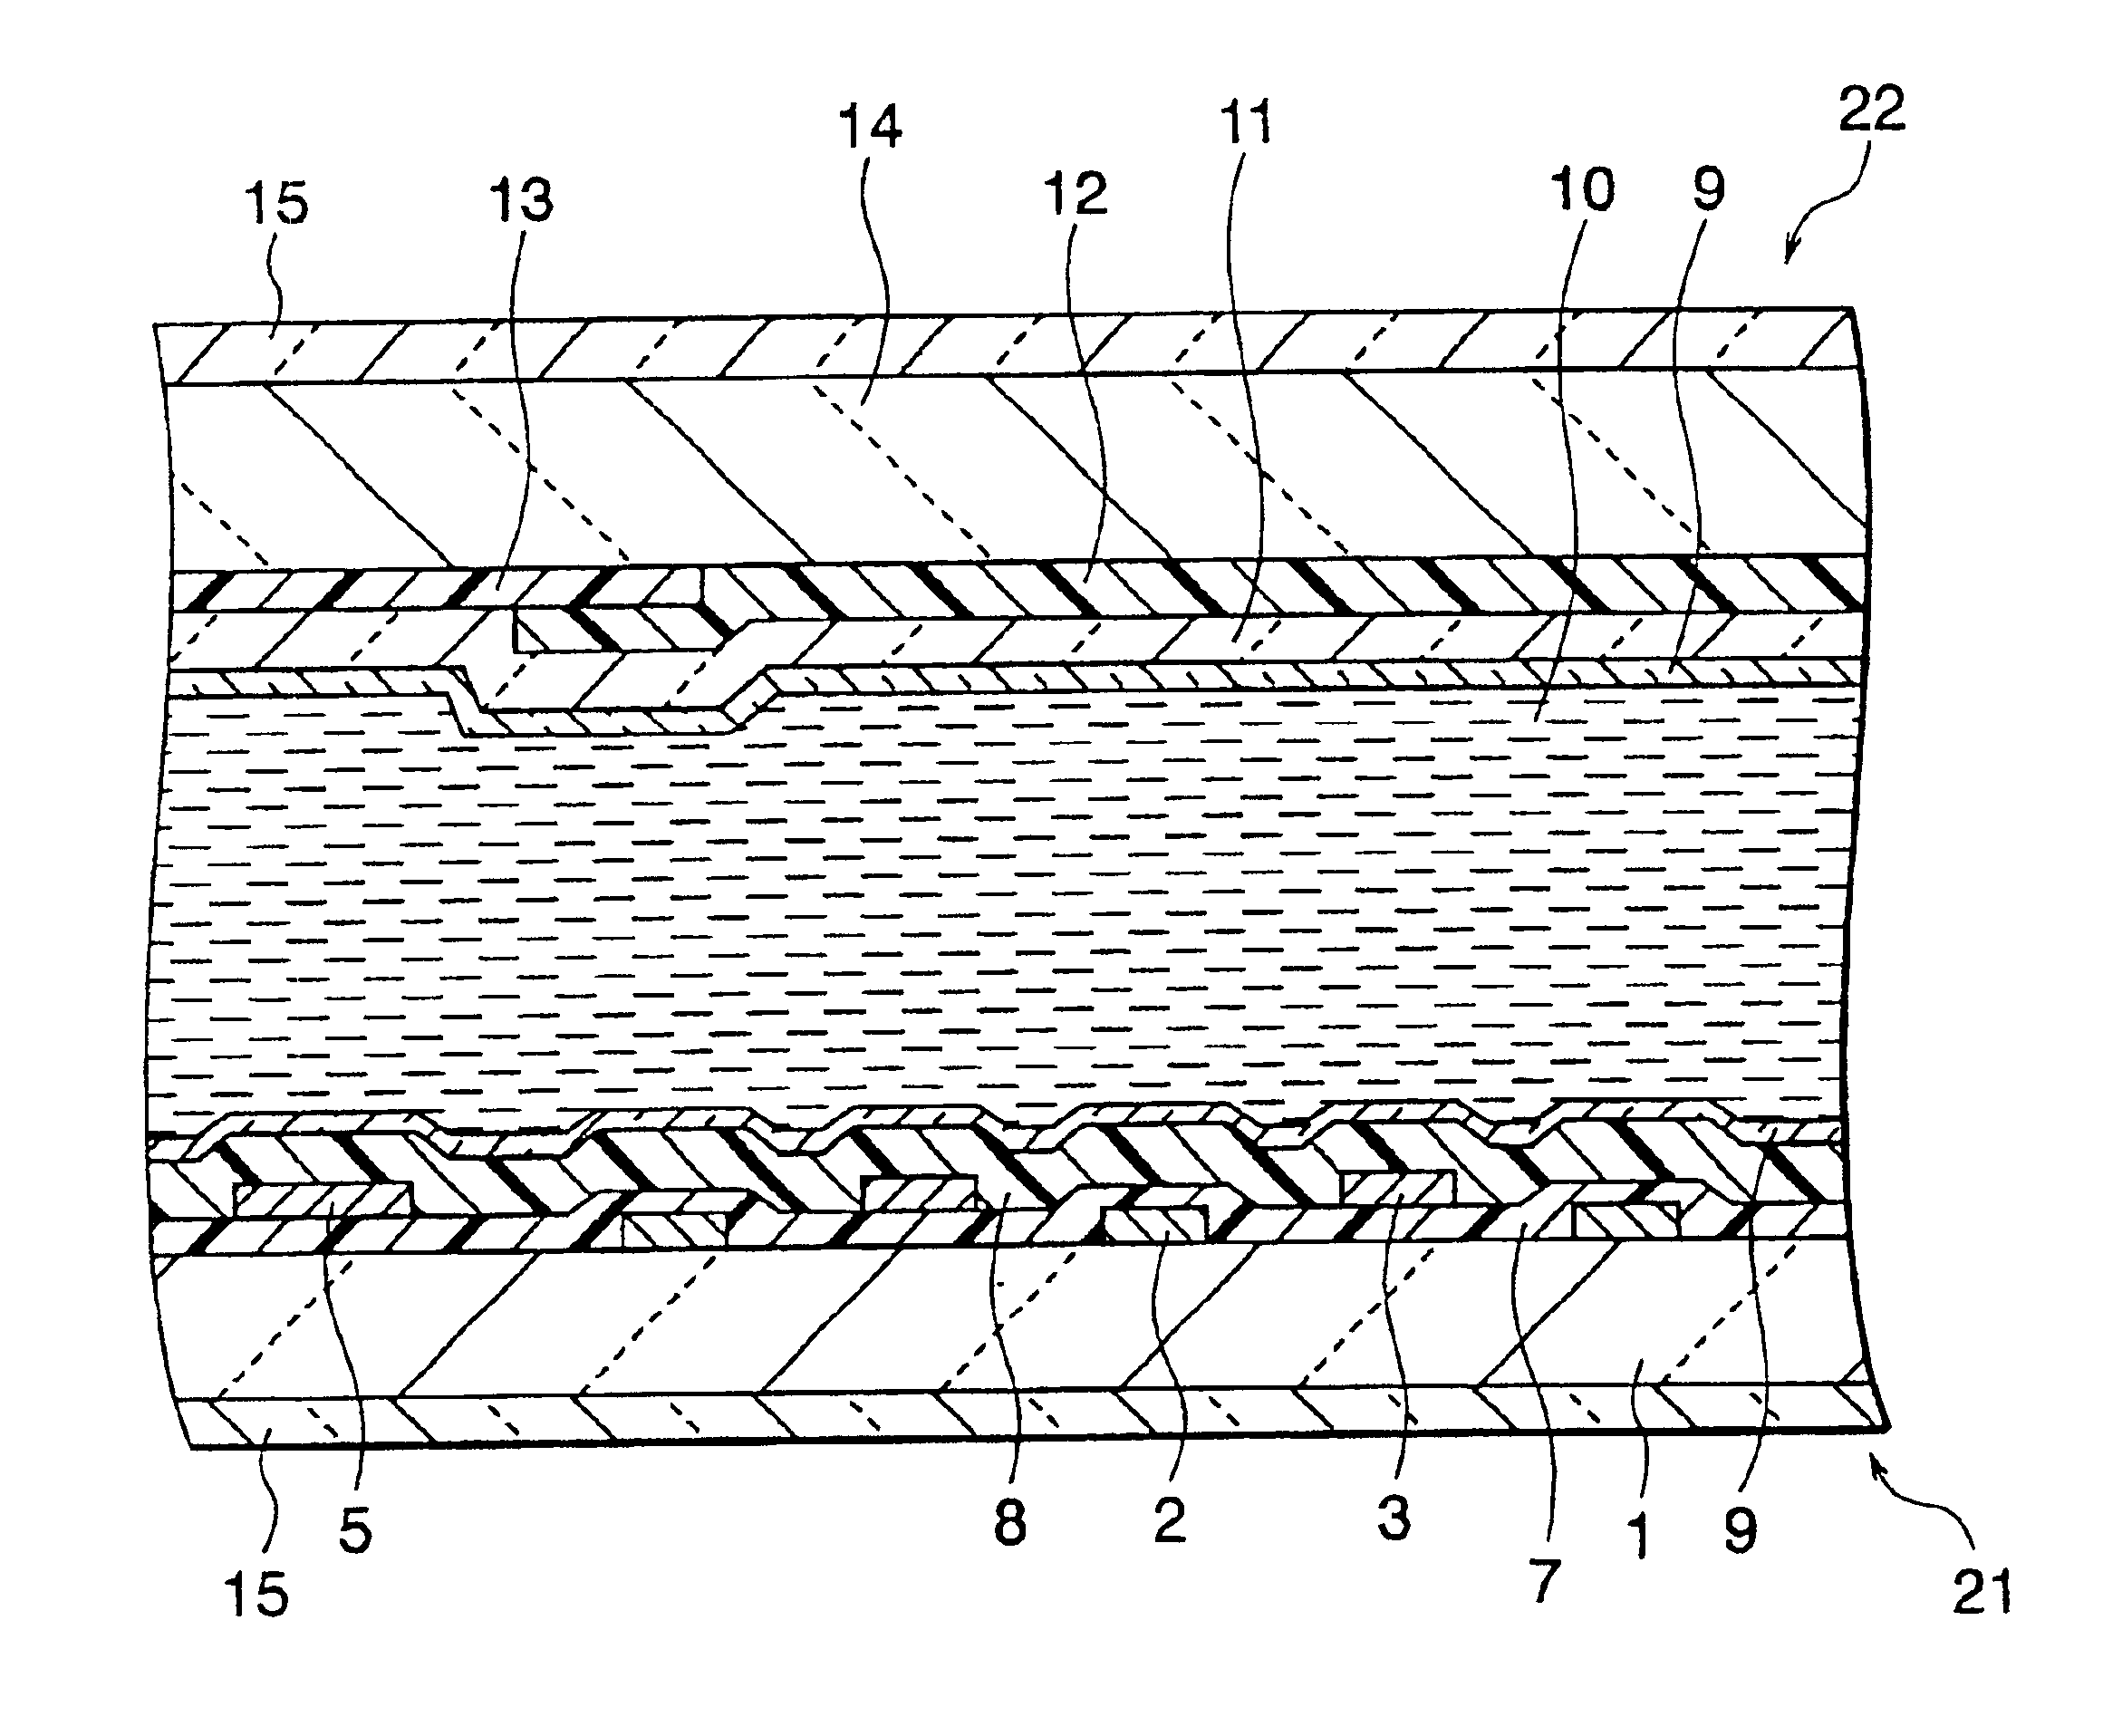 Liquid crystal display device having a black matrix with a specific resistance